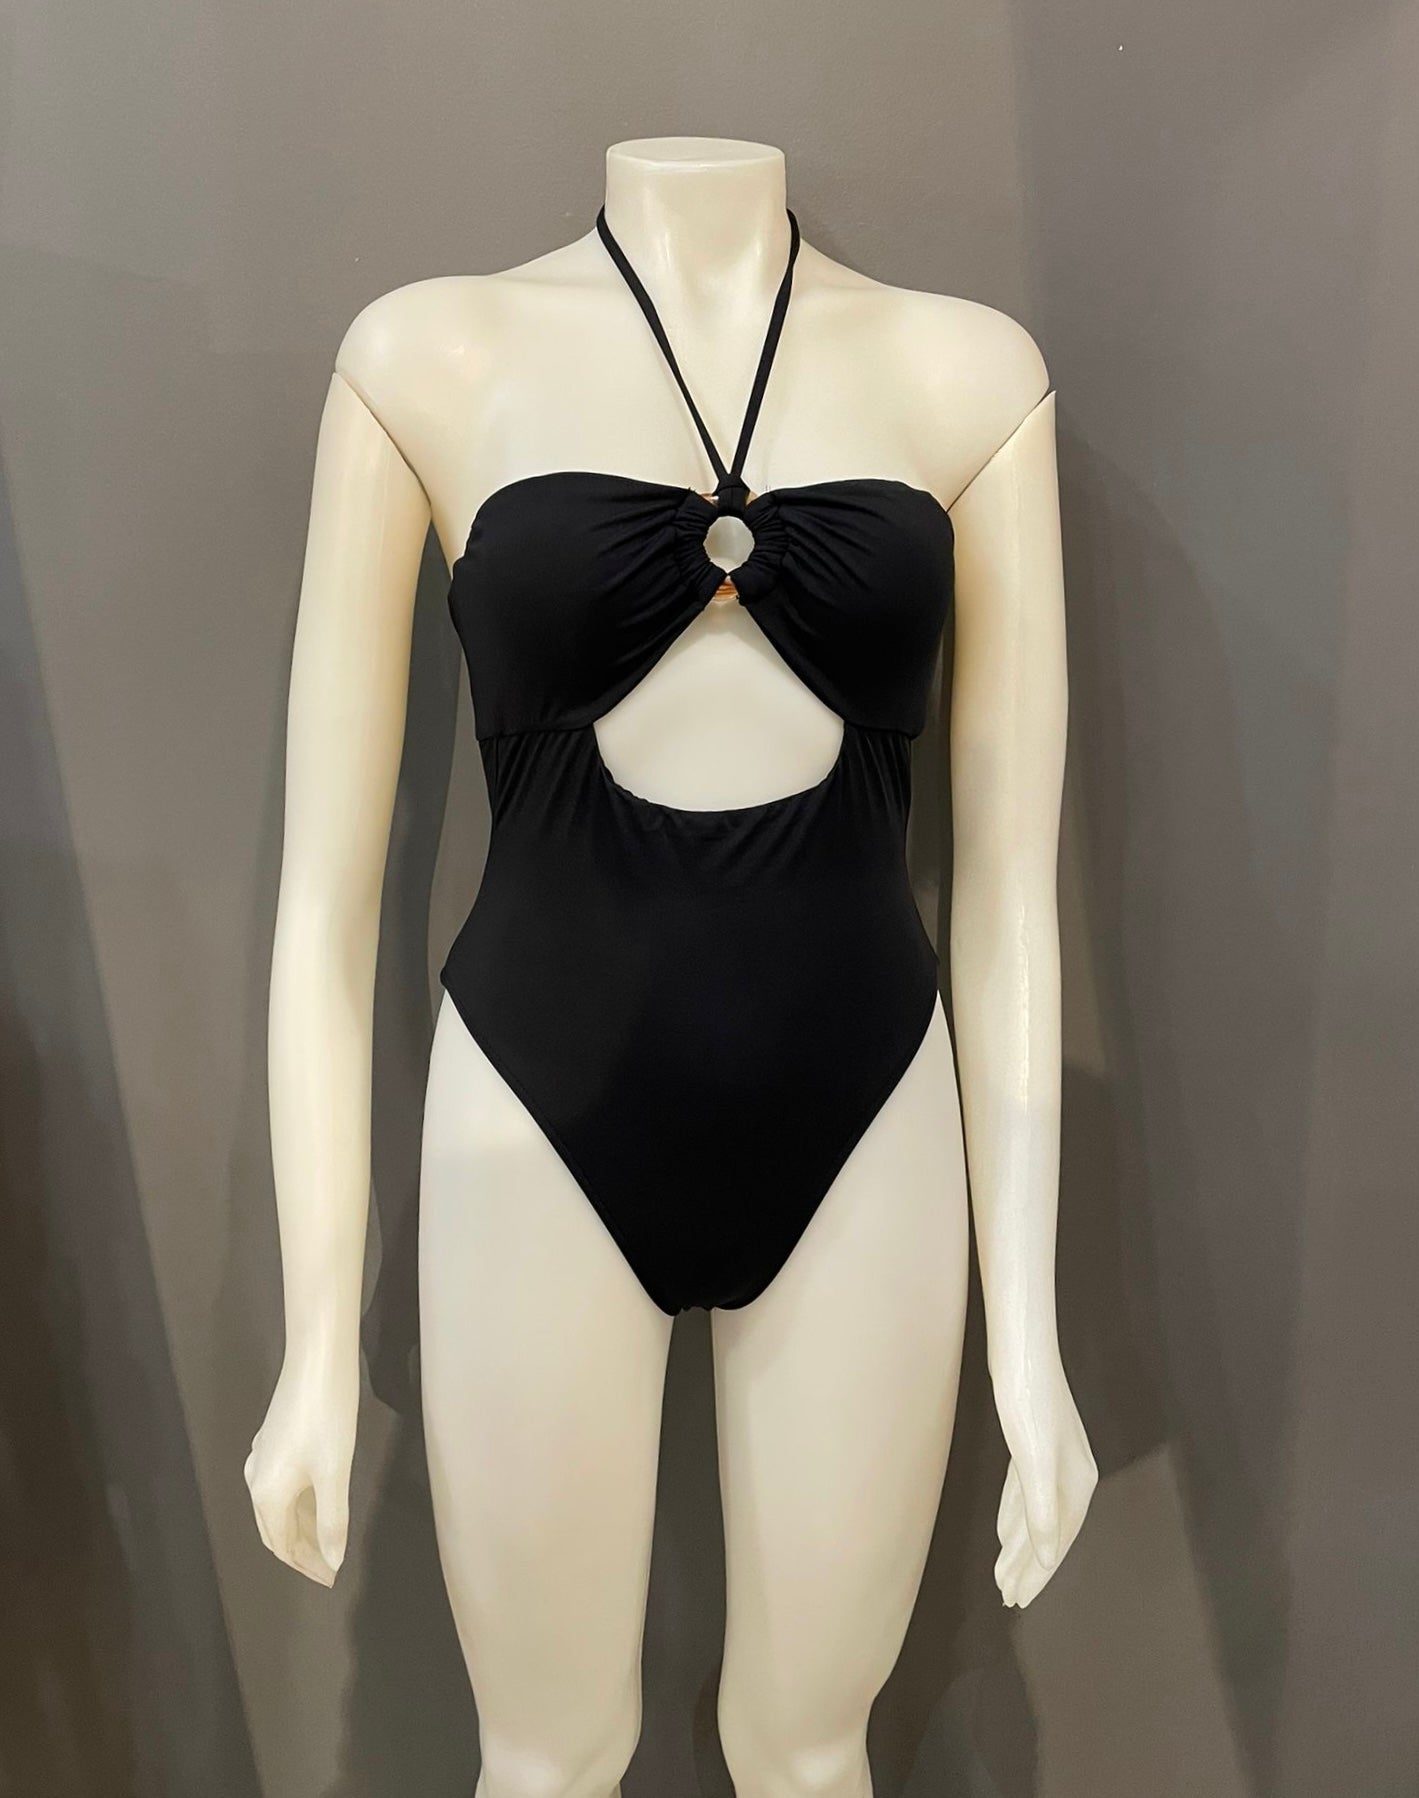 UNIKONCEPT Lifestyle Boutique and Lounge; Dippin Daisys Wave Rider One Piece swimsuit. Pictured on a mannequin